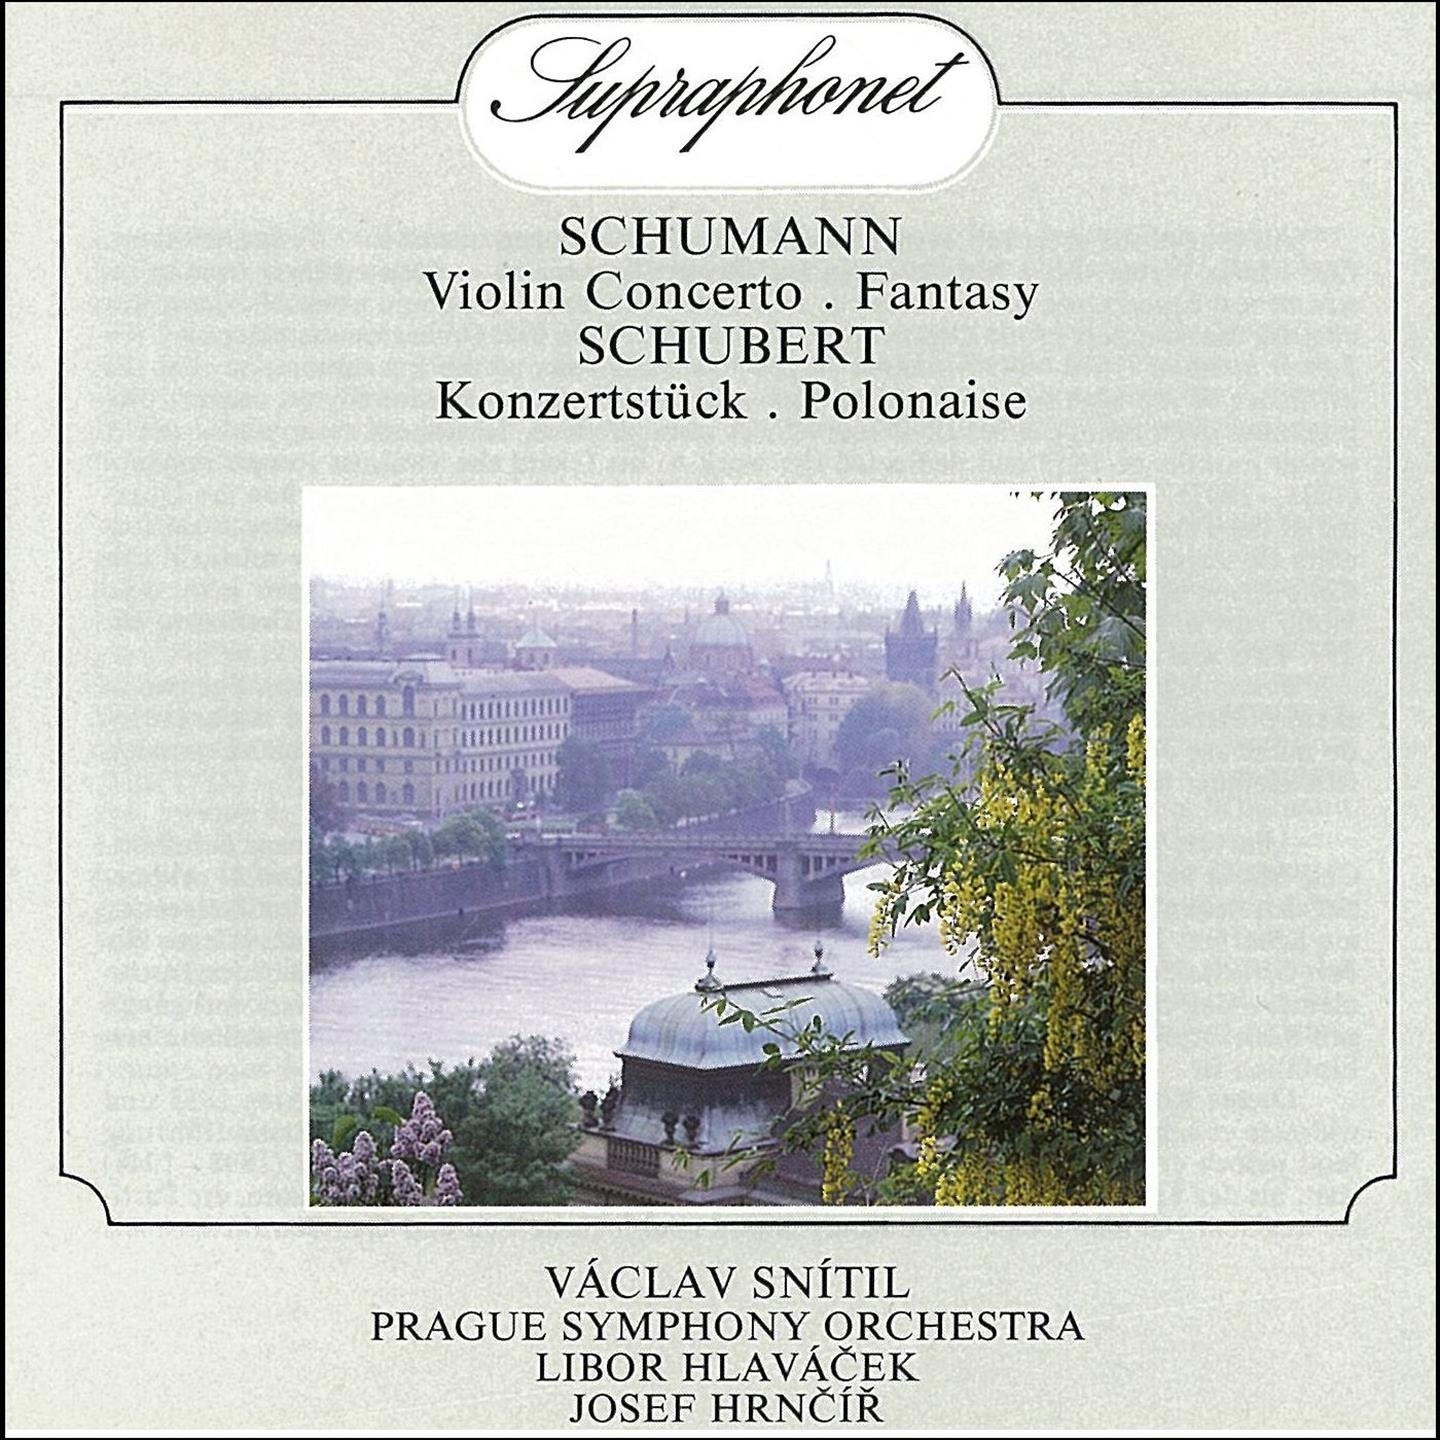 Schumann, Schubert: Compositions For Violin And Orchestra